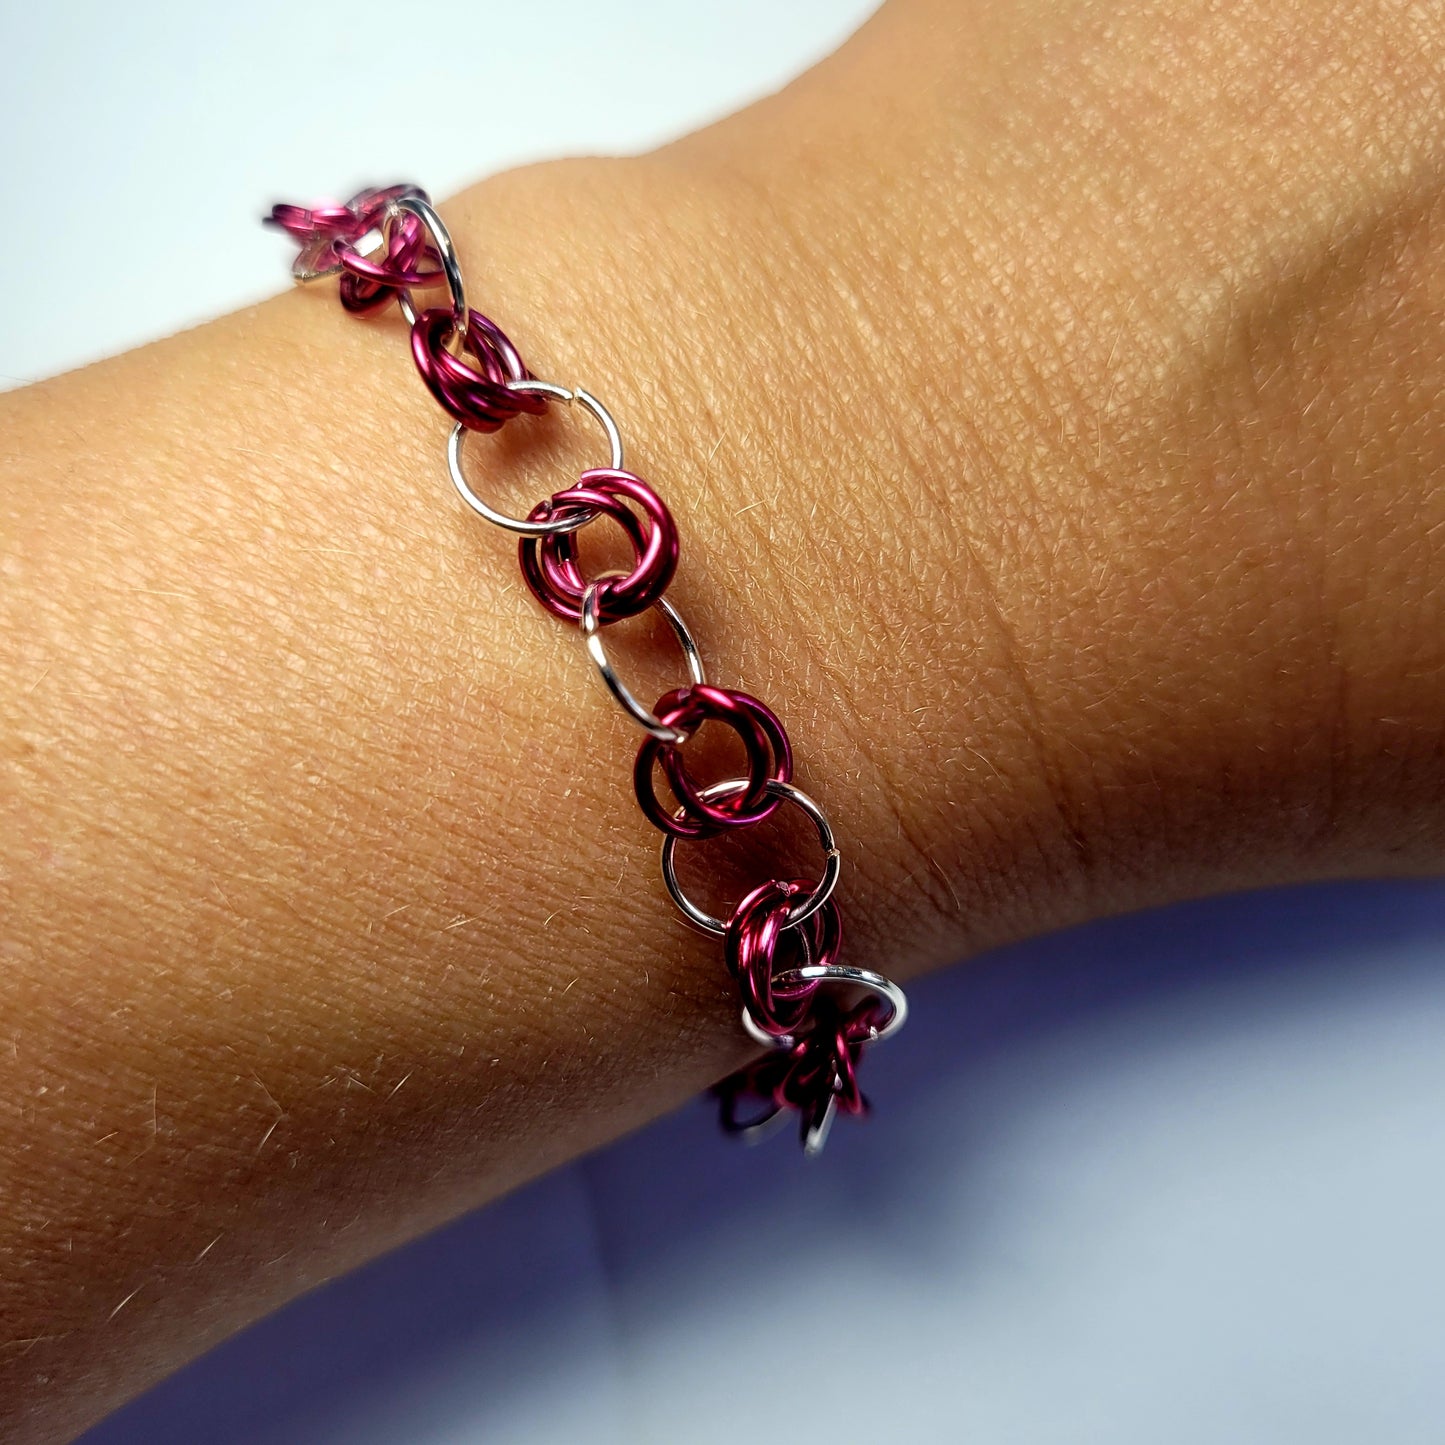 Bracelet, pink and silver chainmail